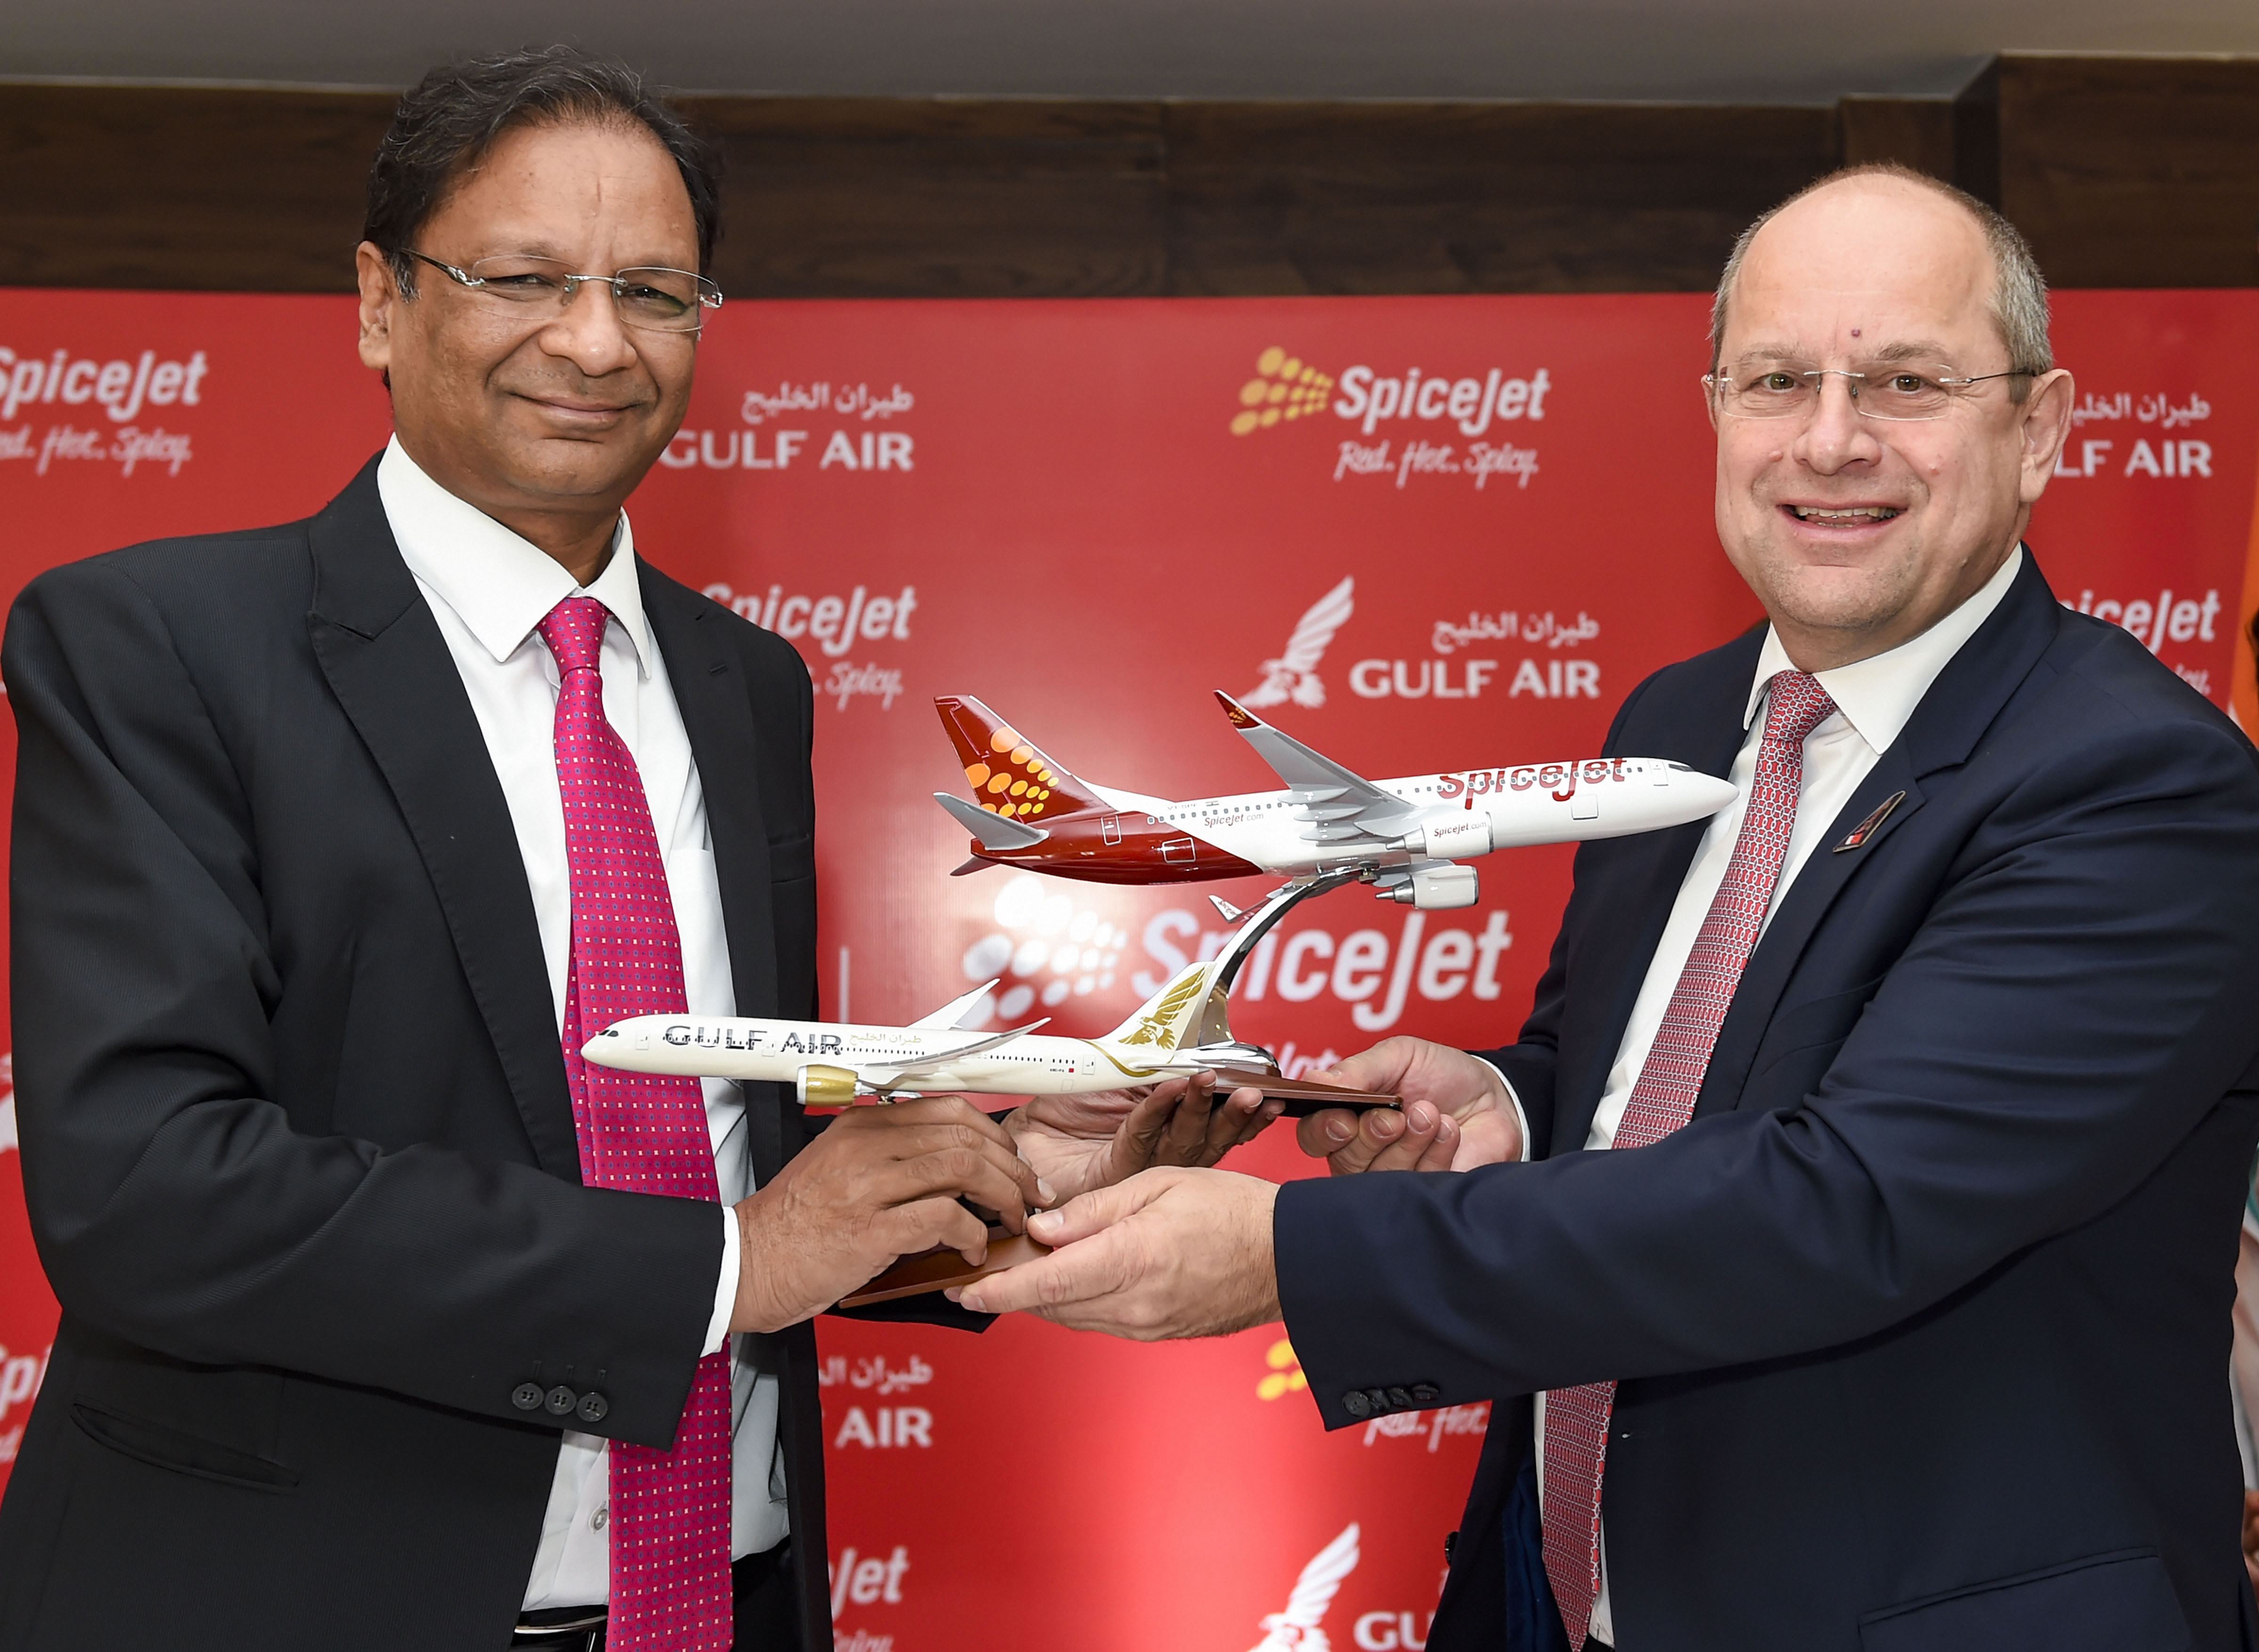 SpiceJet CEO Ajay Singh and Gulf Air CEO Kresimir Kucko during signing of an MoU between the two airlines - PTI